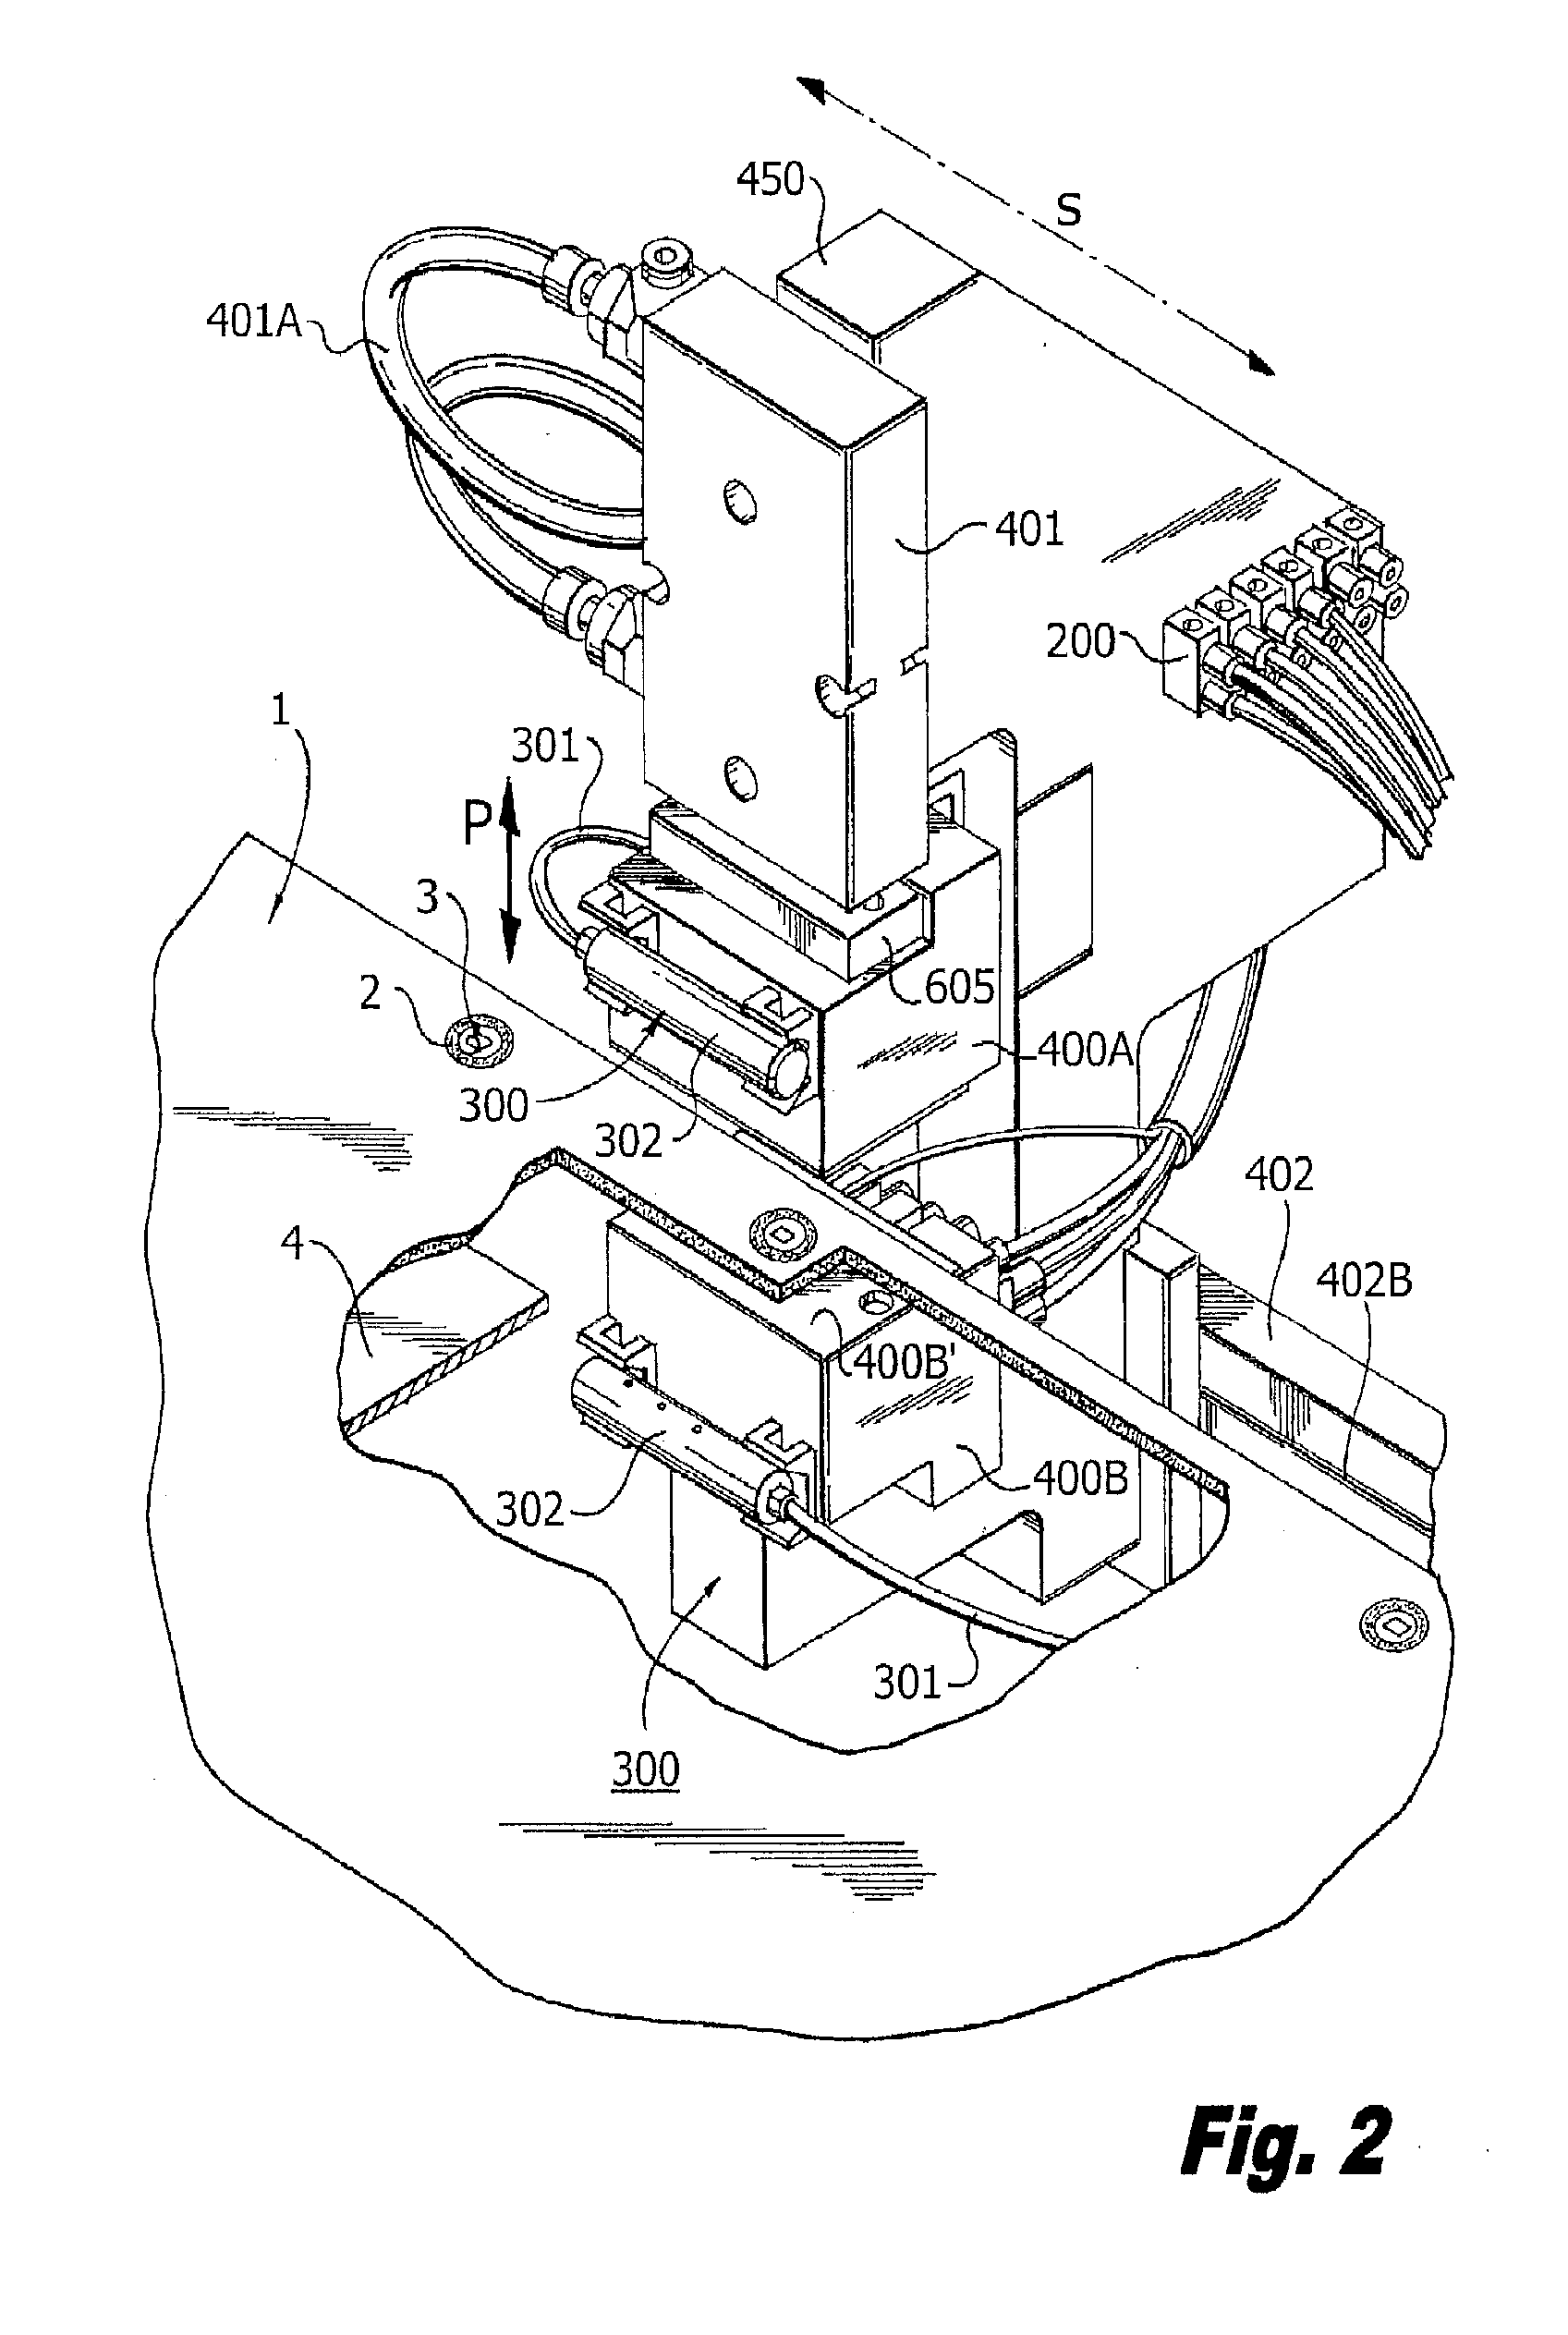 Bond head assembly and system